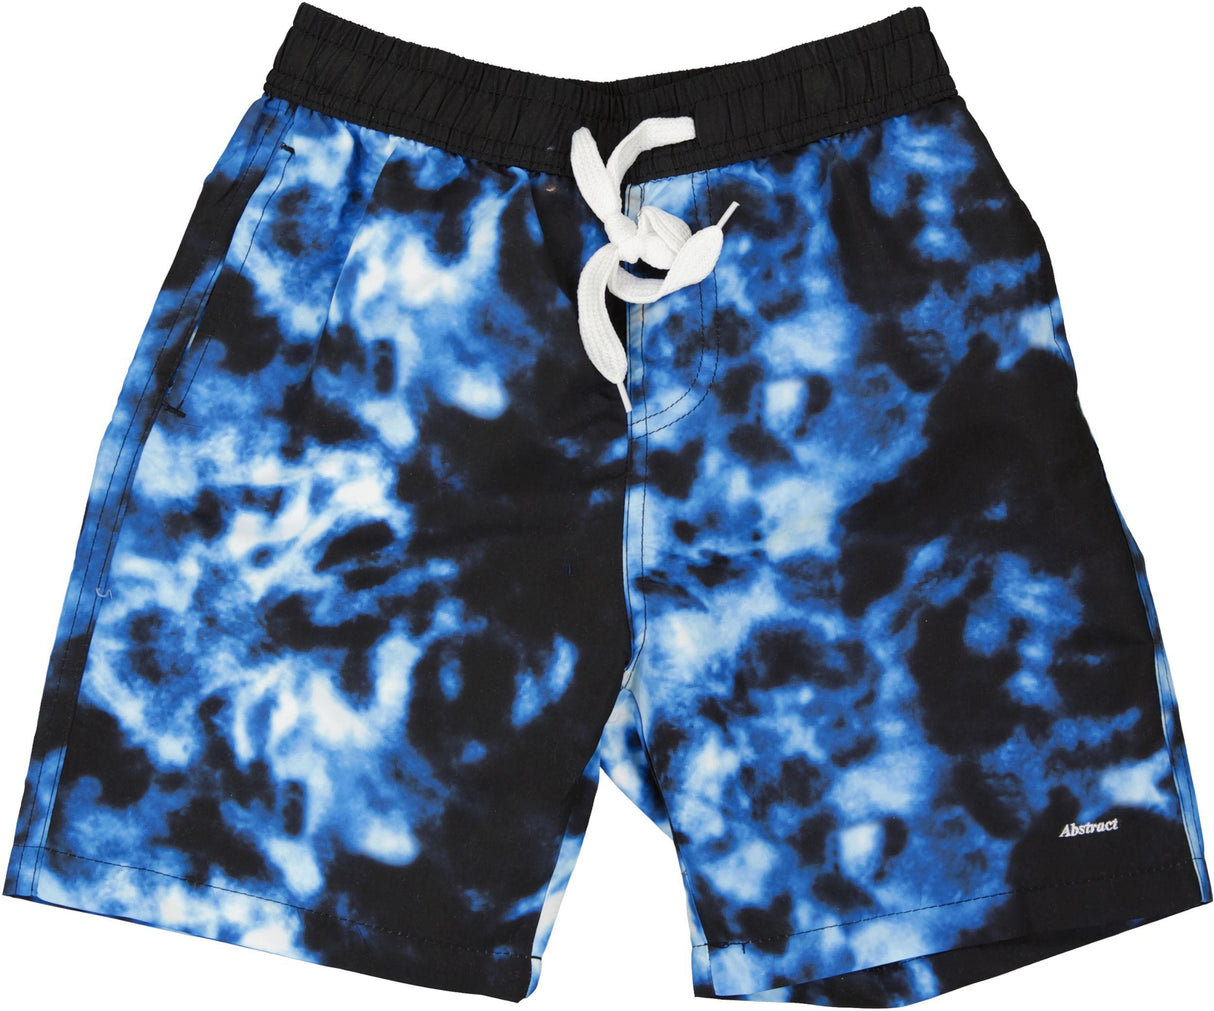 Abstract Boys Bathing Suit - 16SP7TD